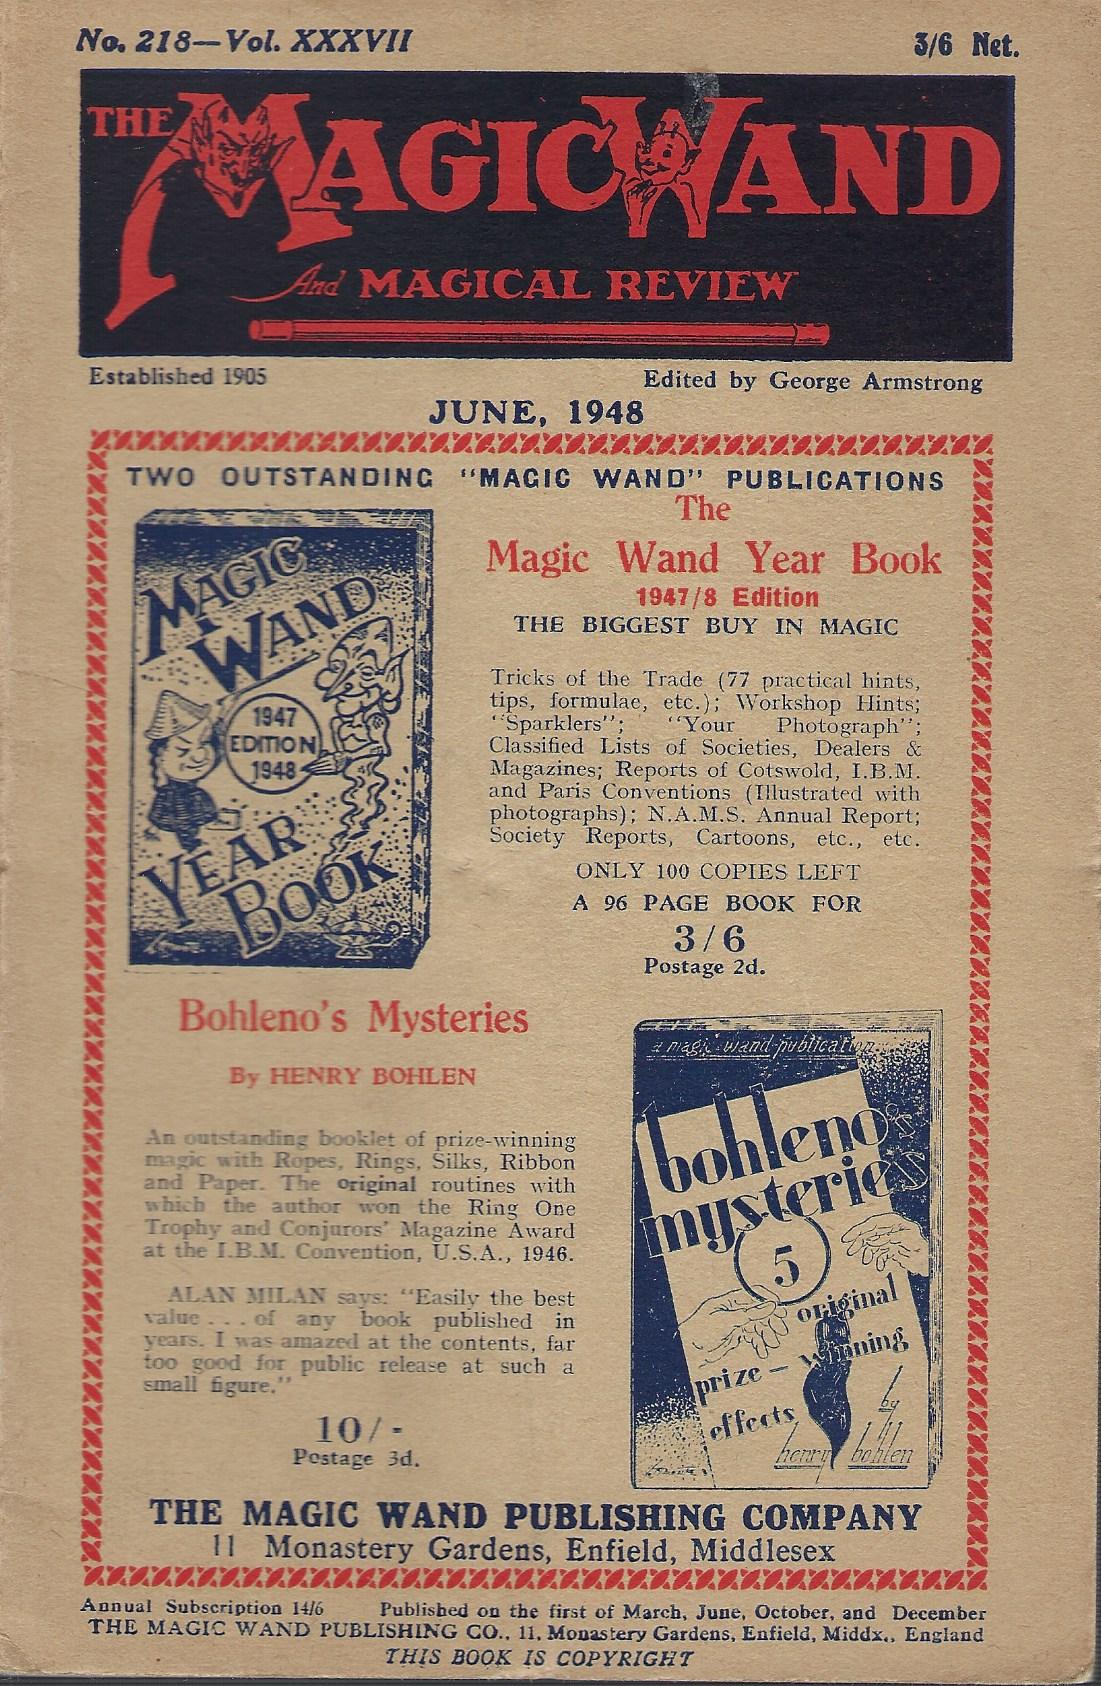 Image for The Magic Wand and Magical Review No218, Vol. XXXVII, June 1948